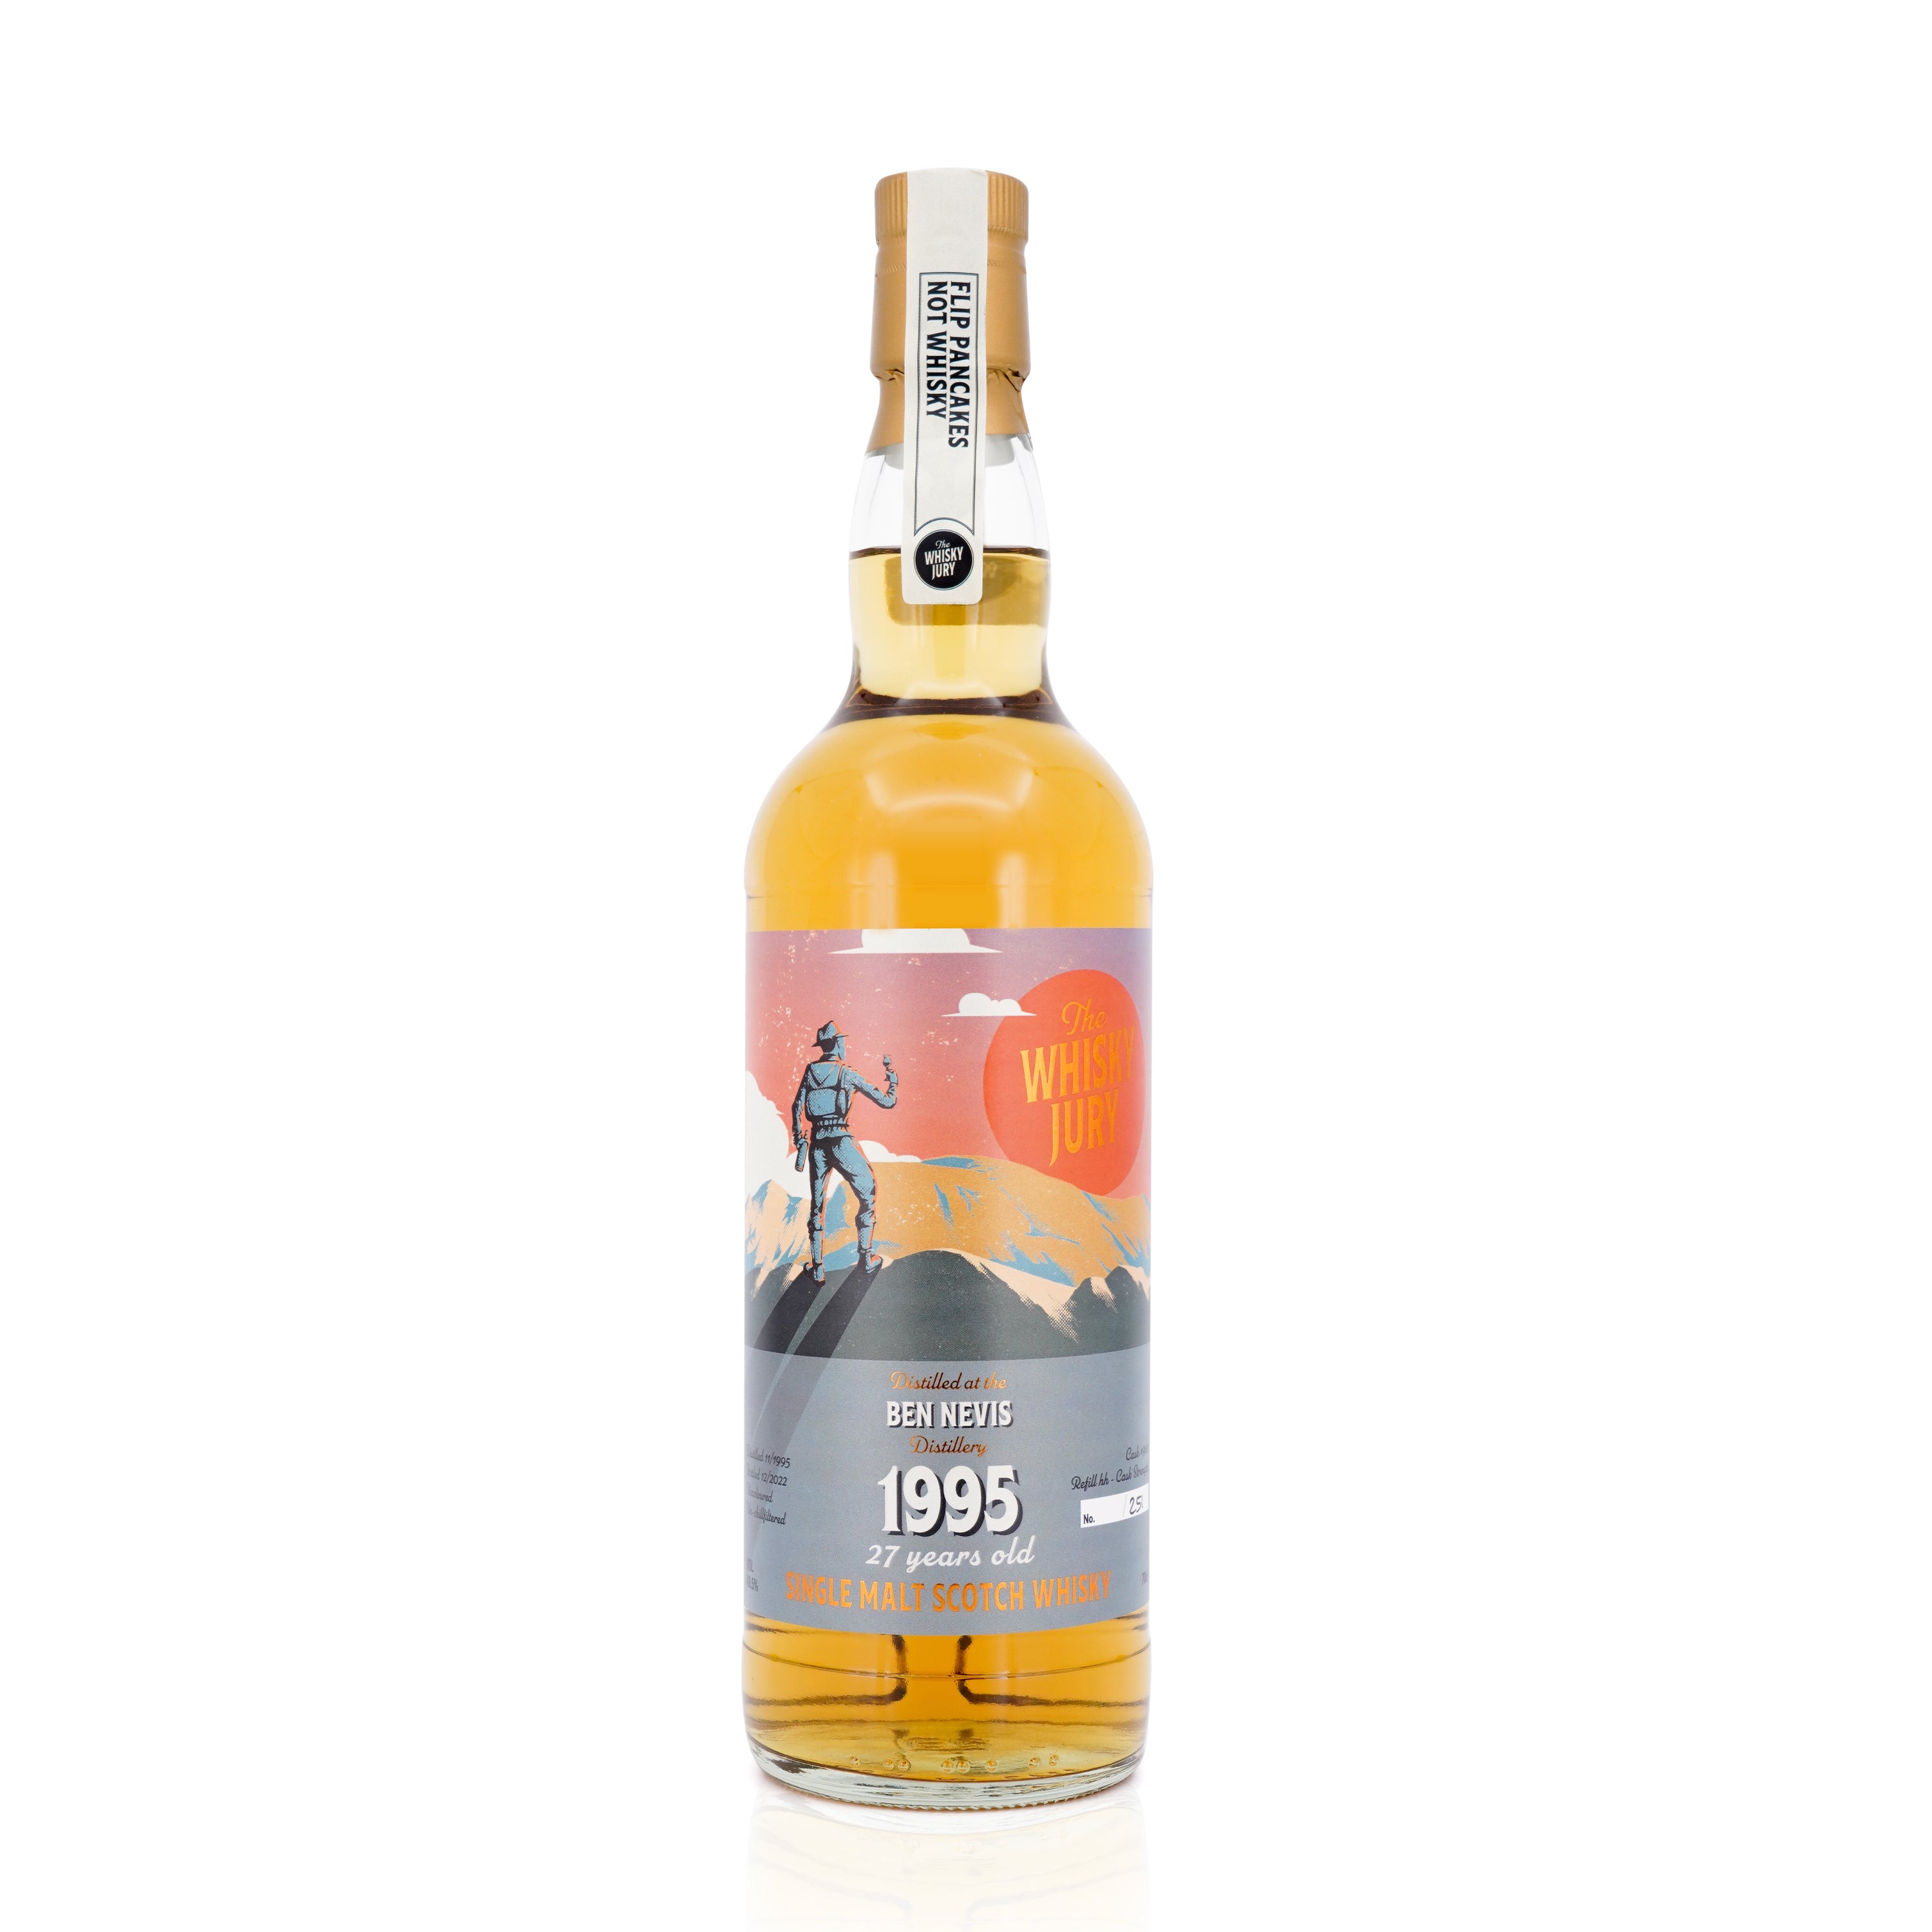 Ben Nevis 27 Years Old 1995/2022 Cask#960 The Whisky Jury 49.5% 700ml